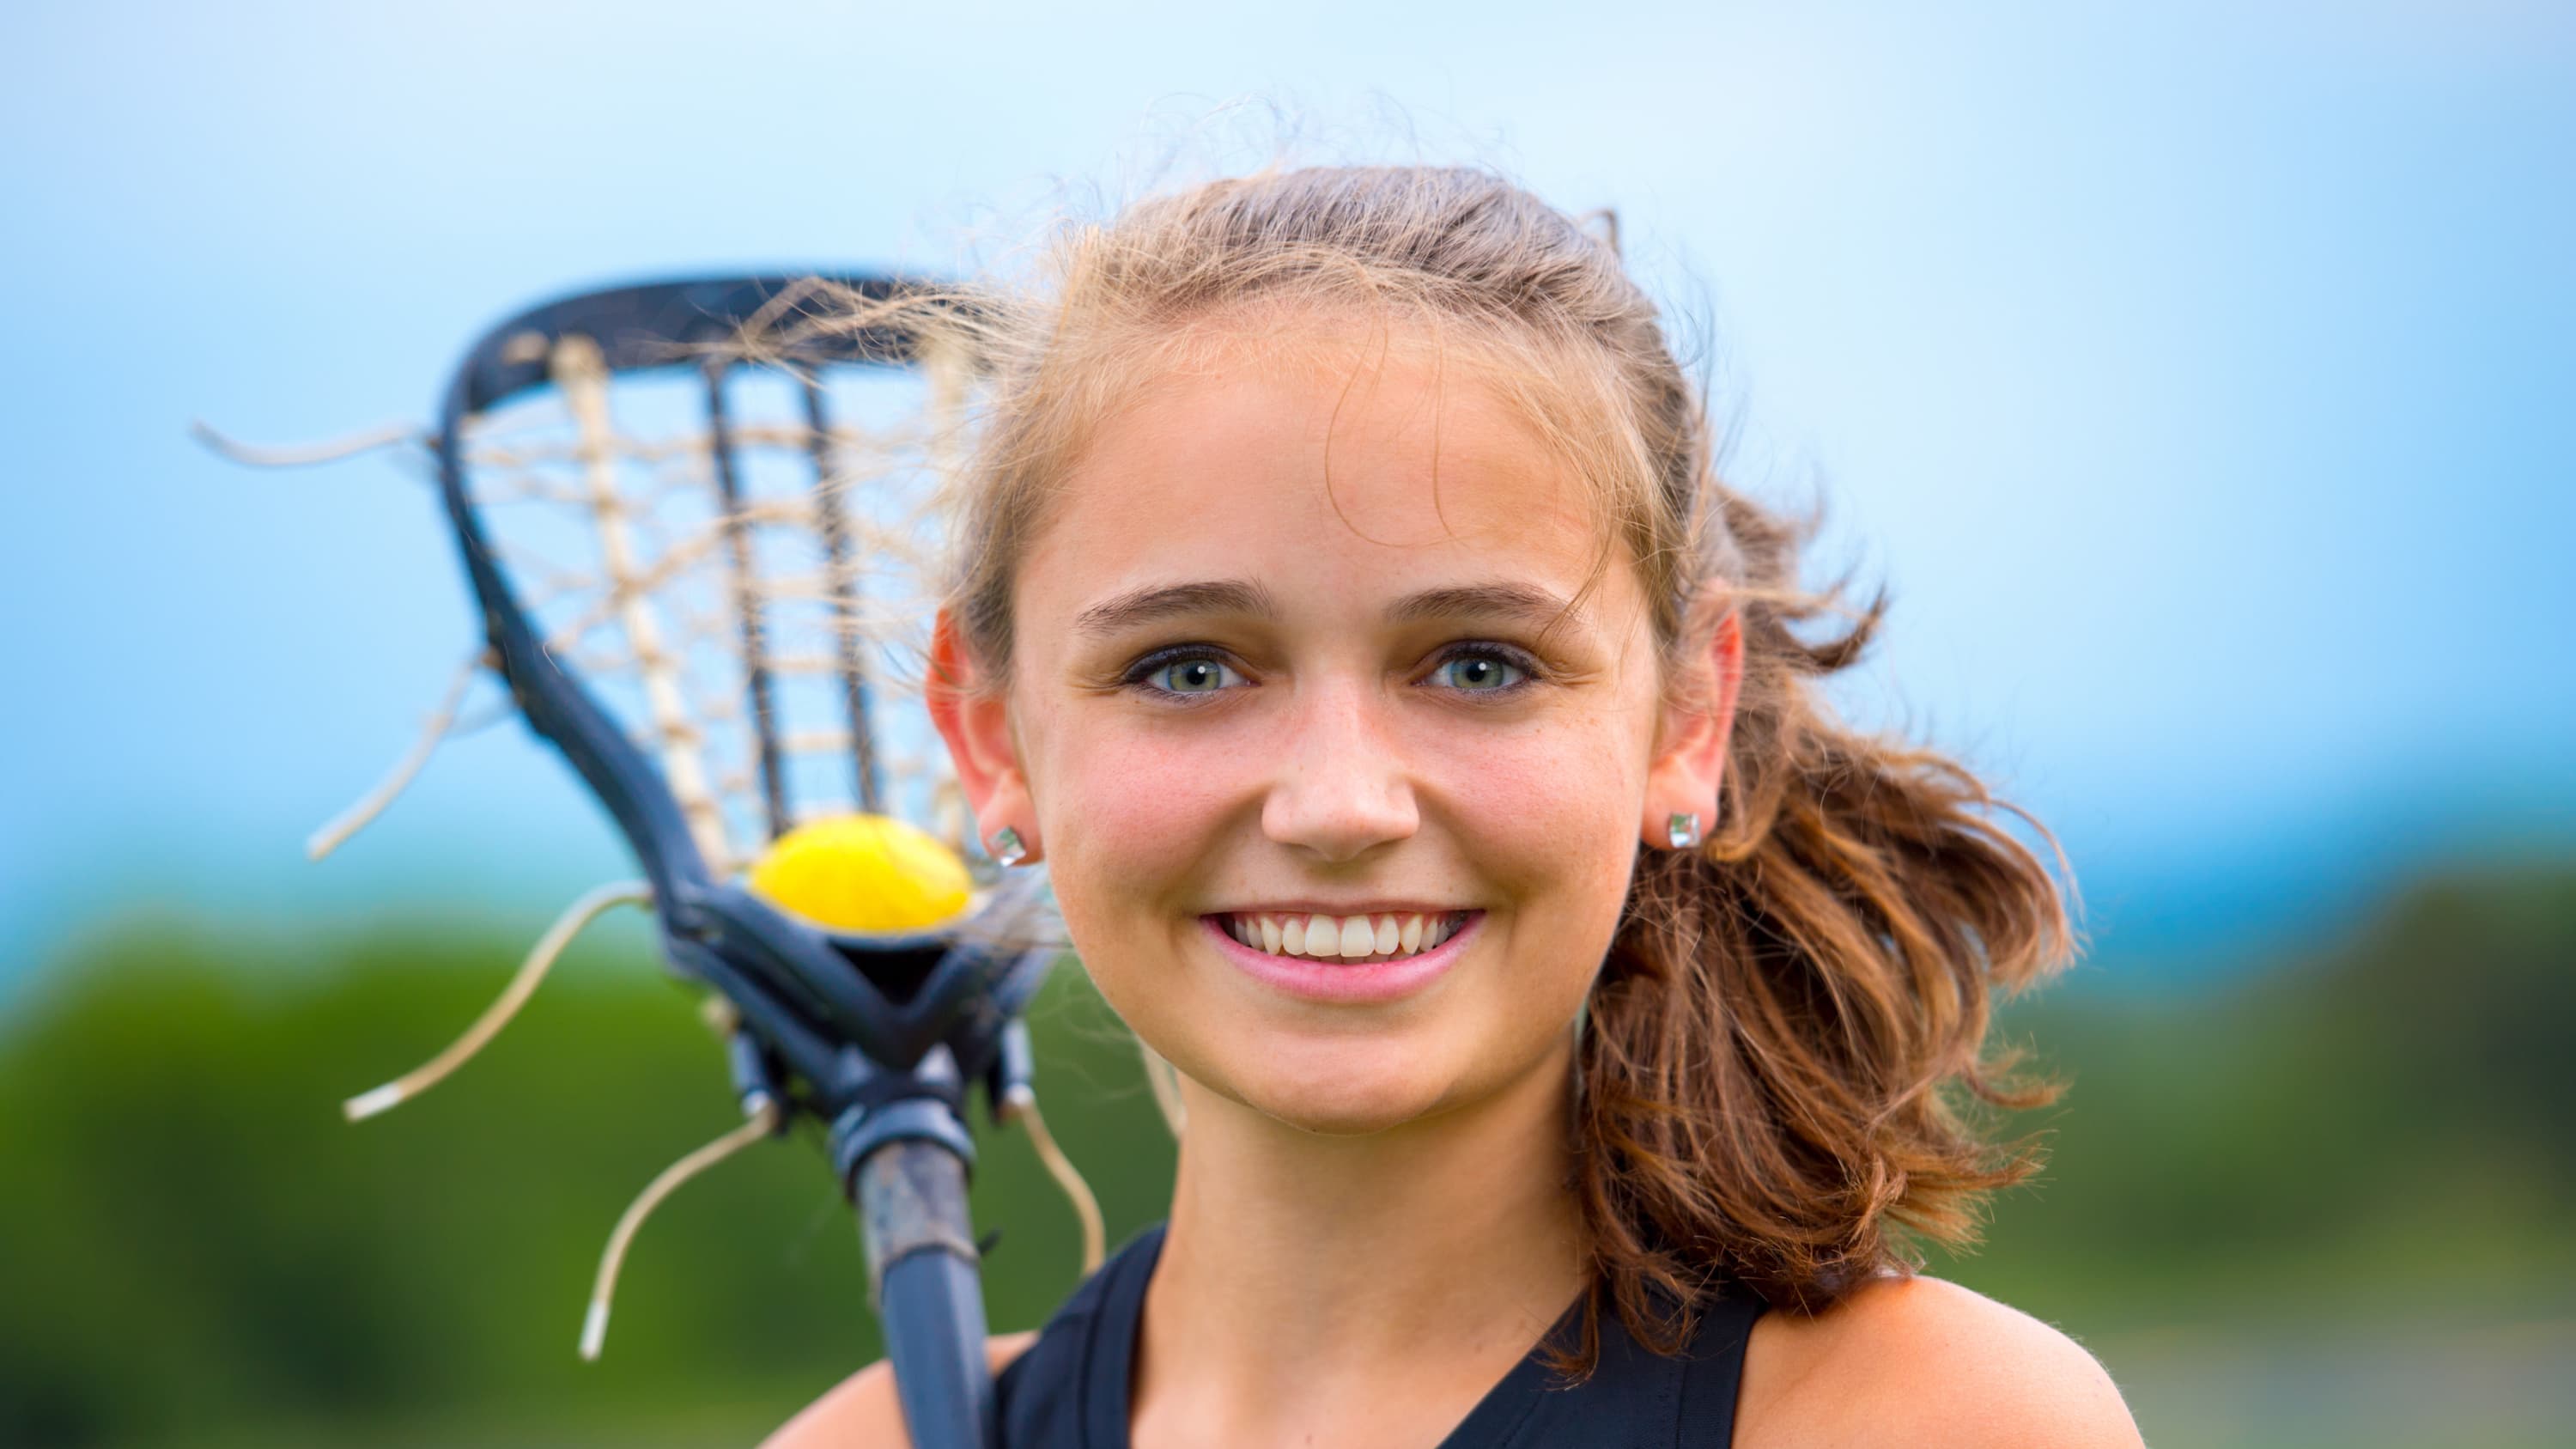 young lacrosse player